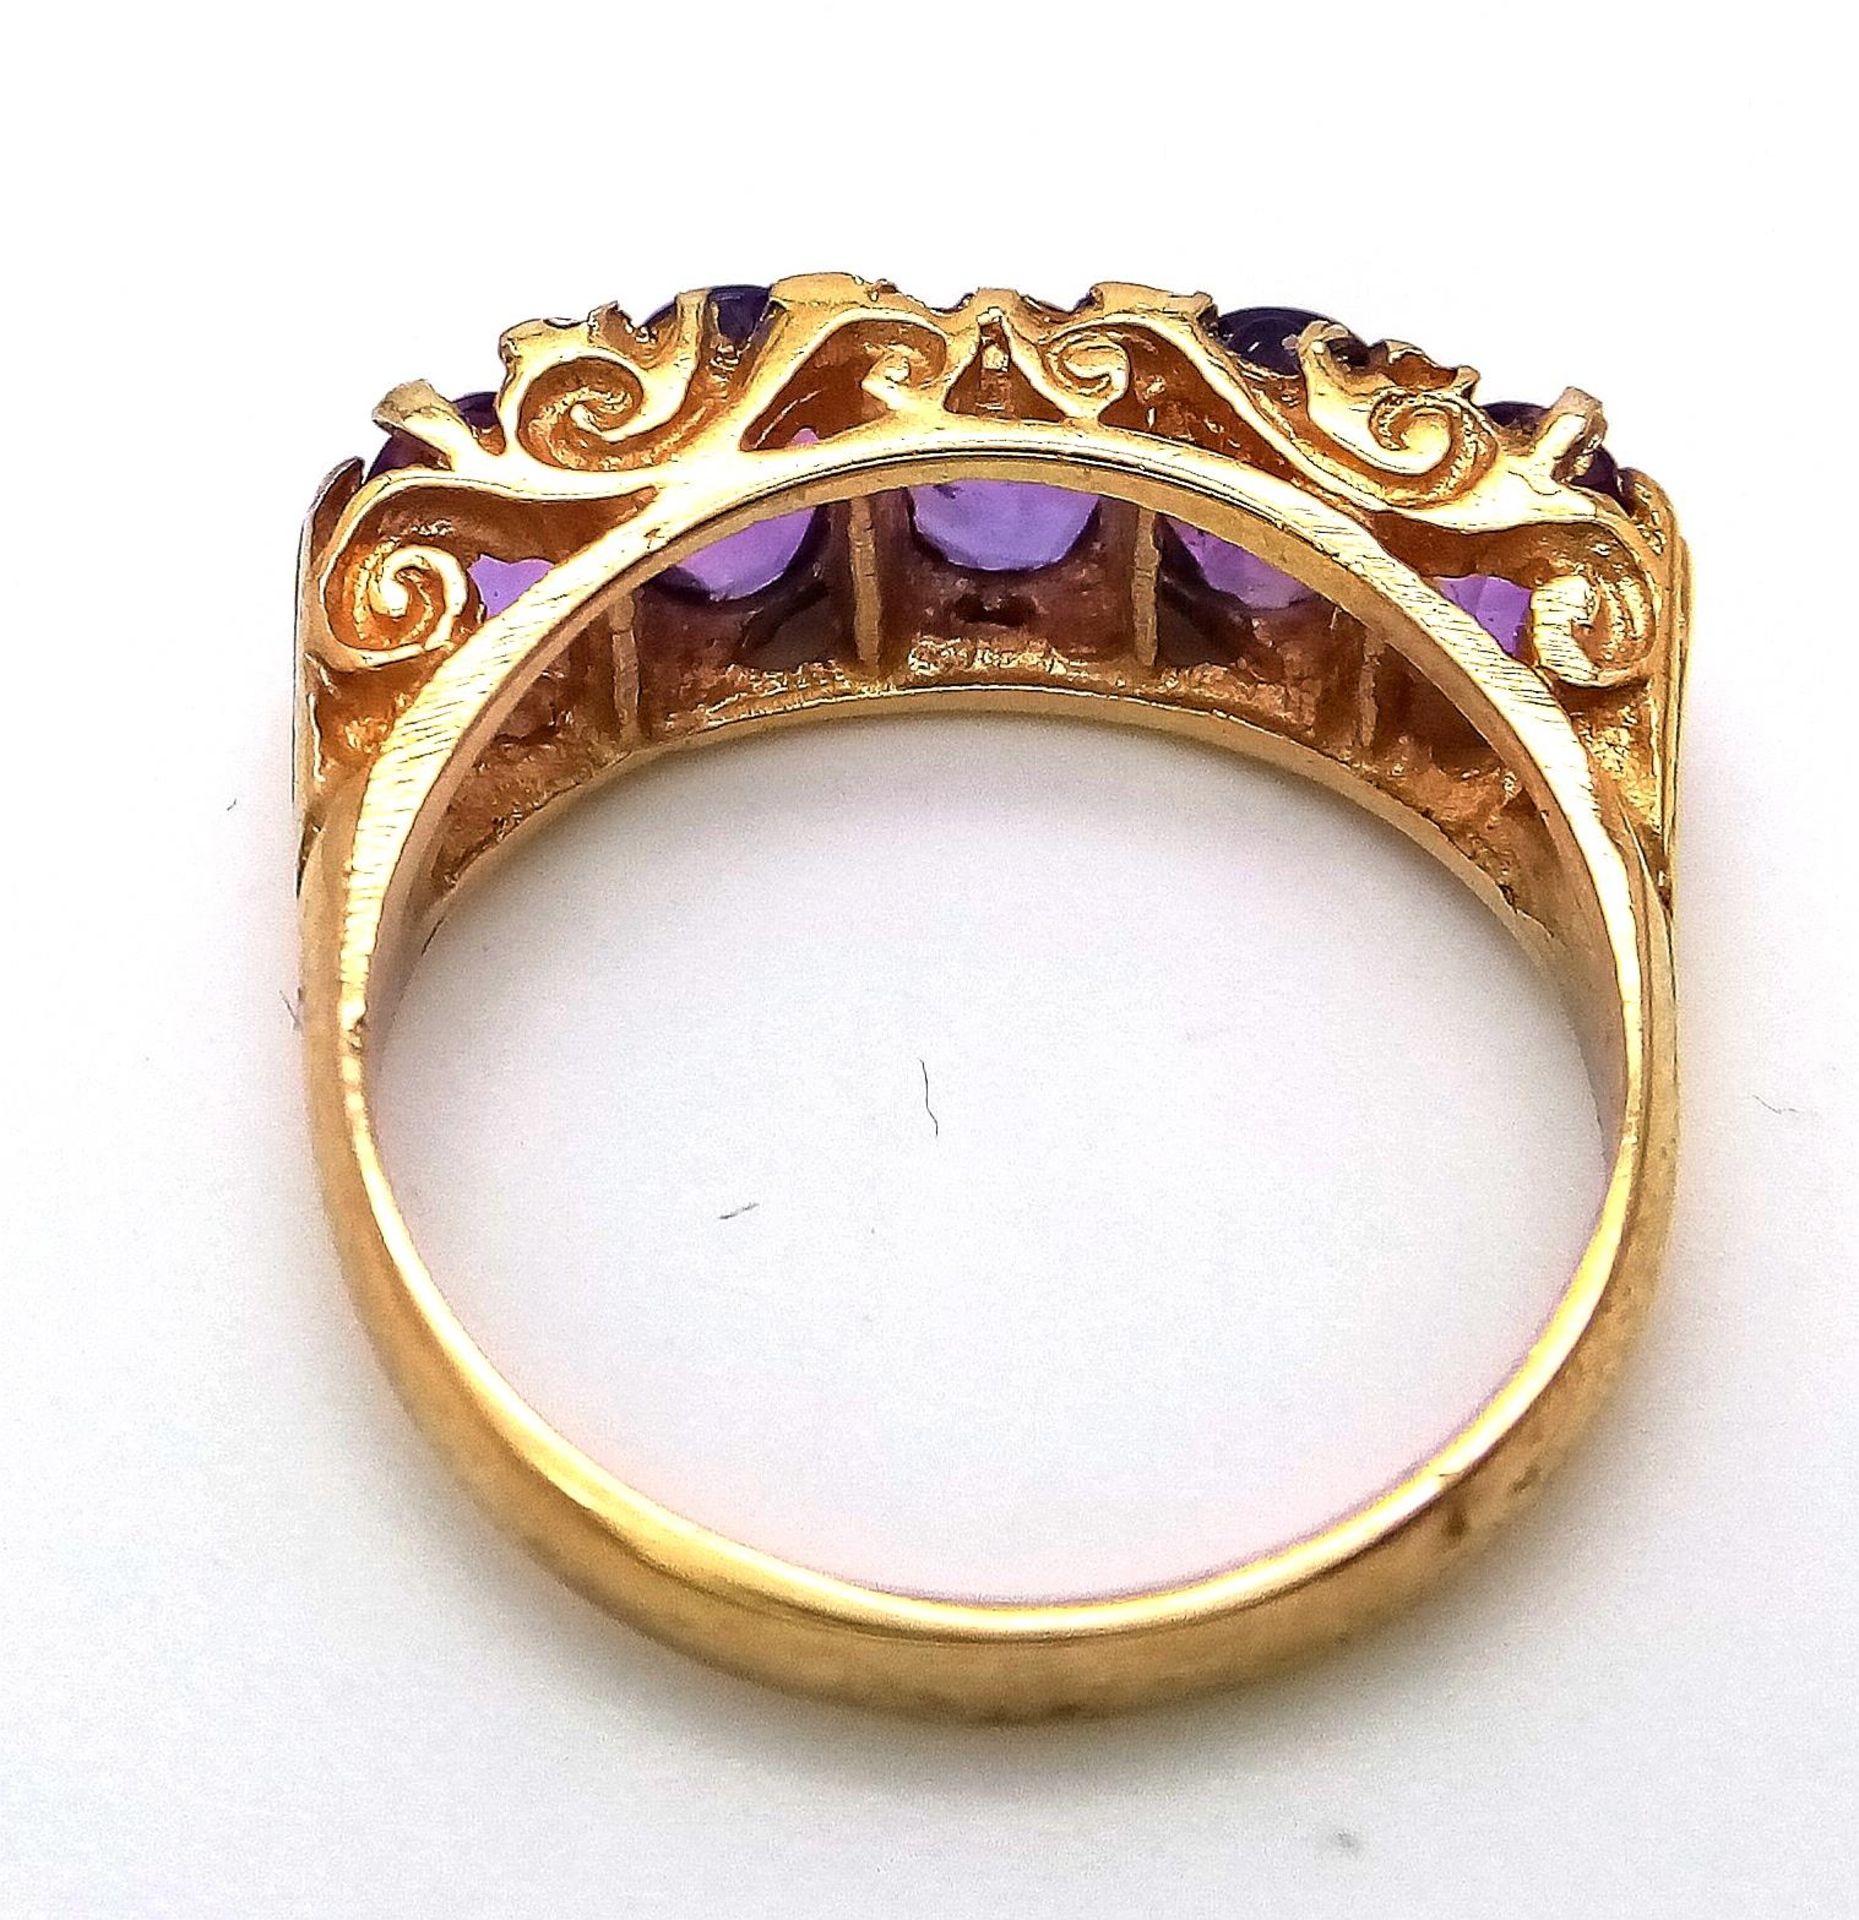 A HIGHLY ORNATE 5 AMETHYST STONE RING SET IN 9K GOLD . 4.2gms size O - Bild 5 aus 6